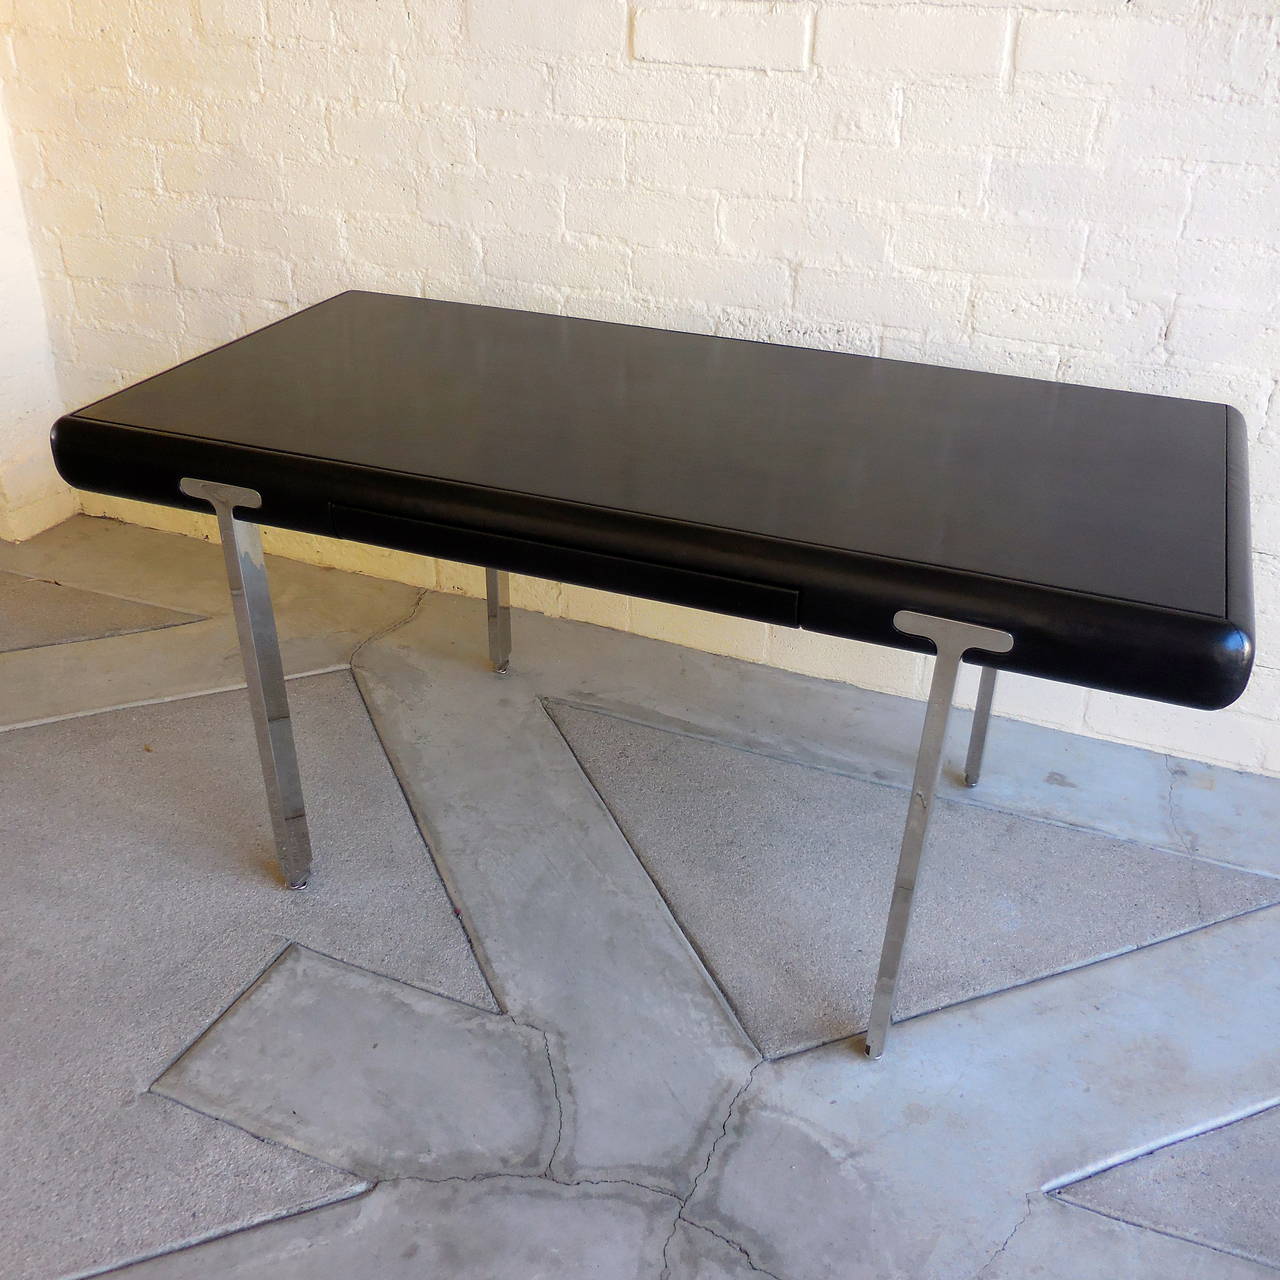 Plated Handsome Black Leather Topped Chrome Leg Writing Table, circa 1970s